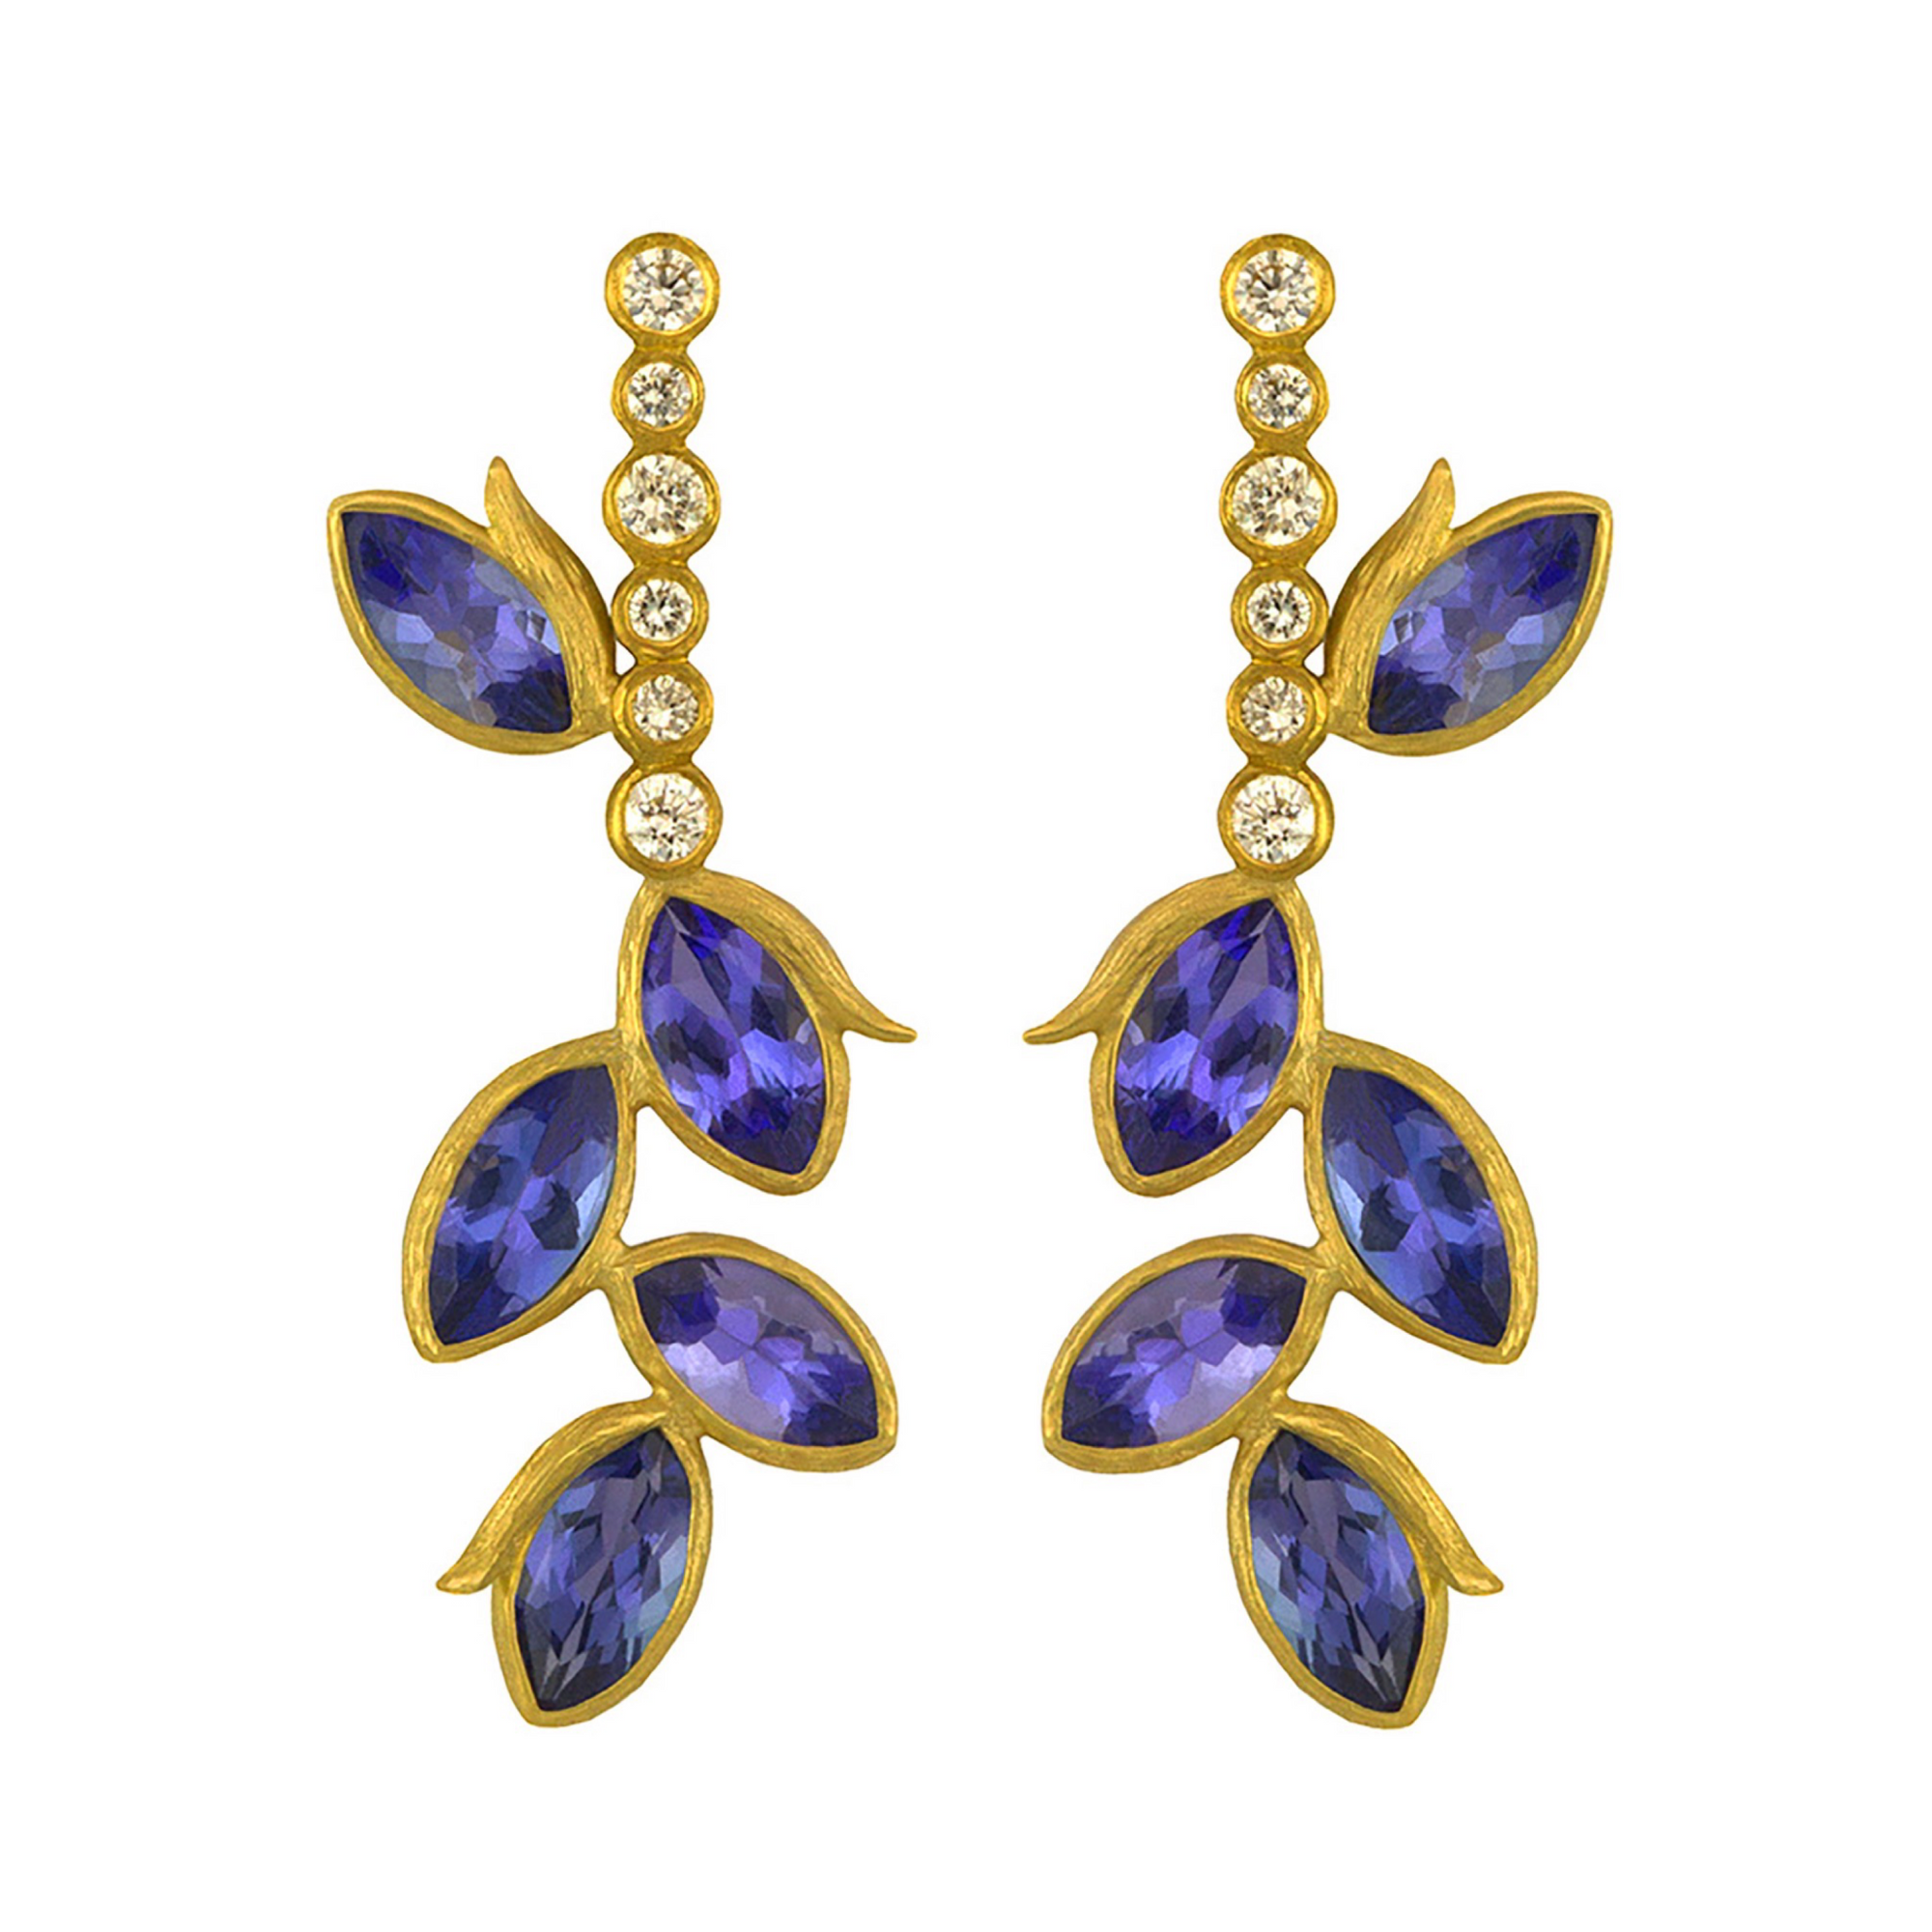 Tanzanite Vine Earrings by Laurie Kaiser available at Talisman Collection Fine Jewelers in El Dorado Hills, CA and online. Crafted from 18k yellow gold and feature marquis cut Tanzanite leaves that trail from a line of white diamonds. With 0.20 cts of diamonds, these earrings provide the perfect sparkle that will add an elegant touch to any outfit.